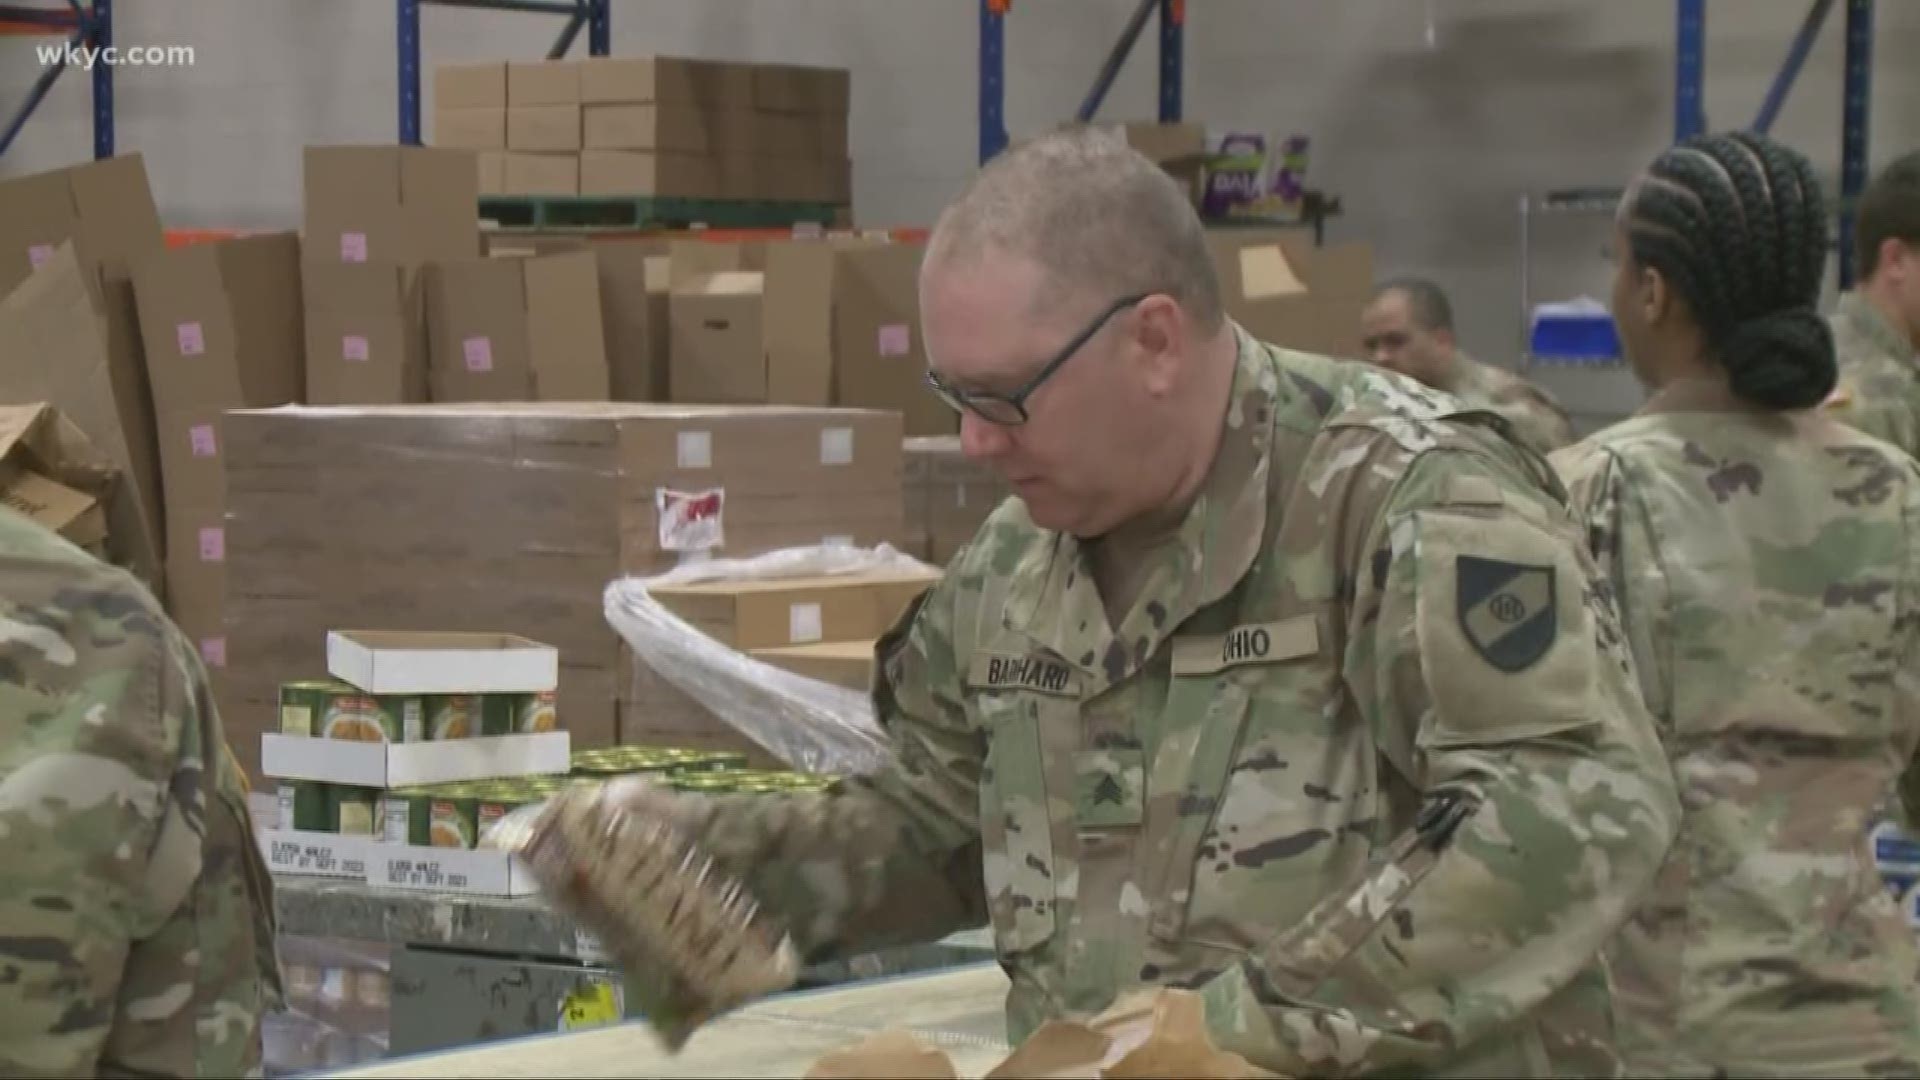 The national guard is helping food banks during this pandemic. 3News' Romney Smith gives us a look at how soldiers are lending a hand.